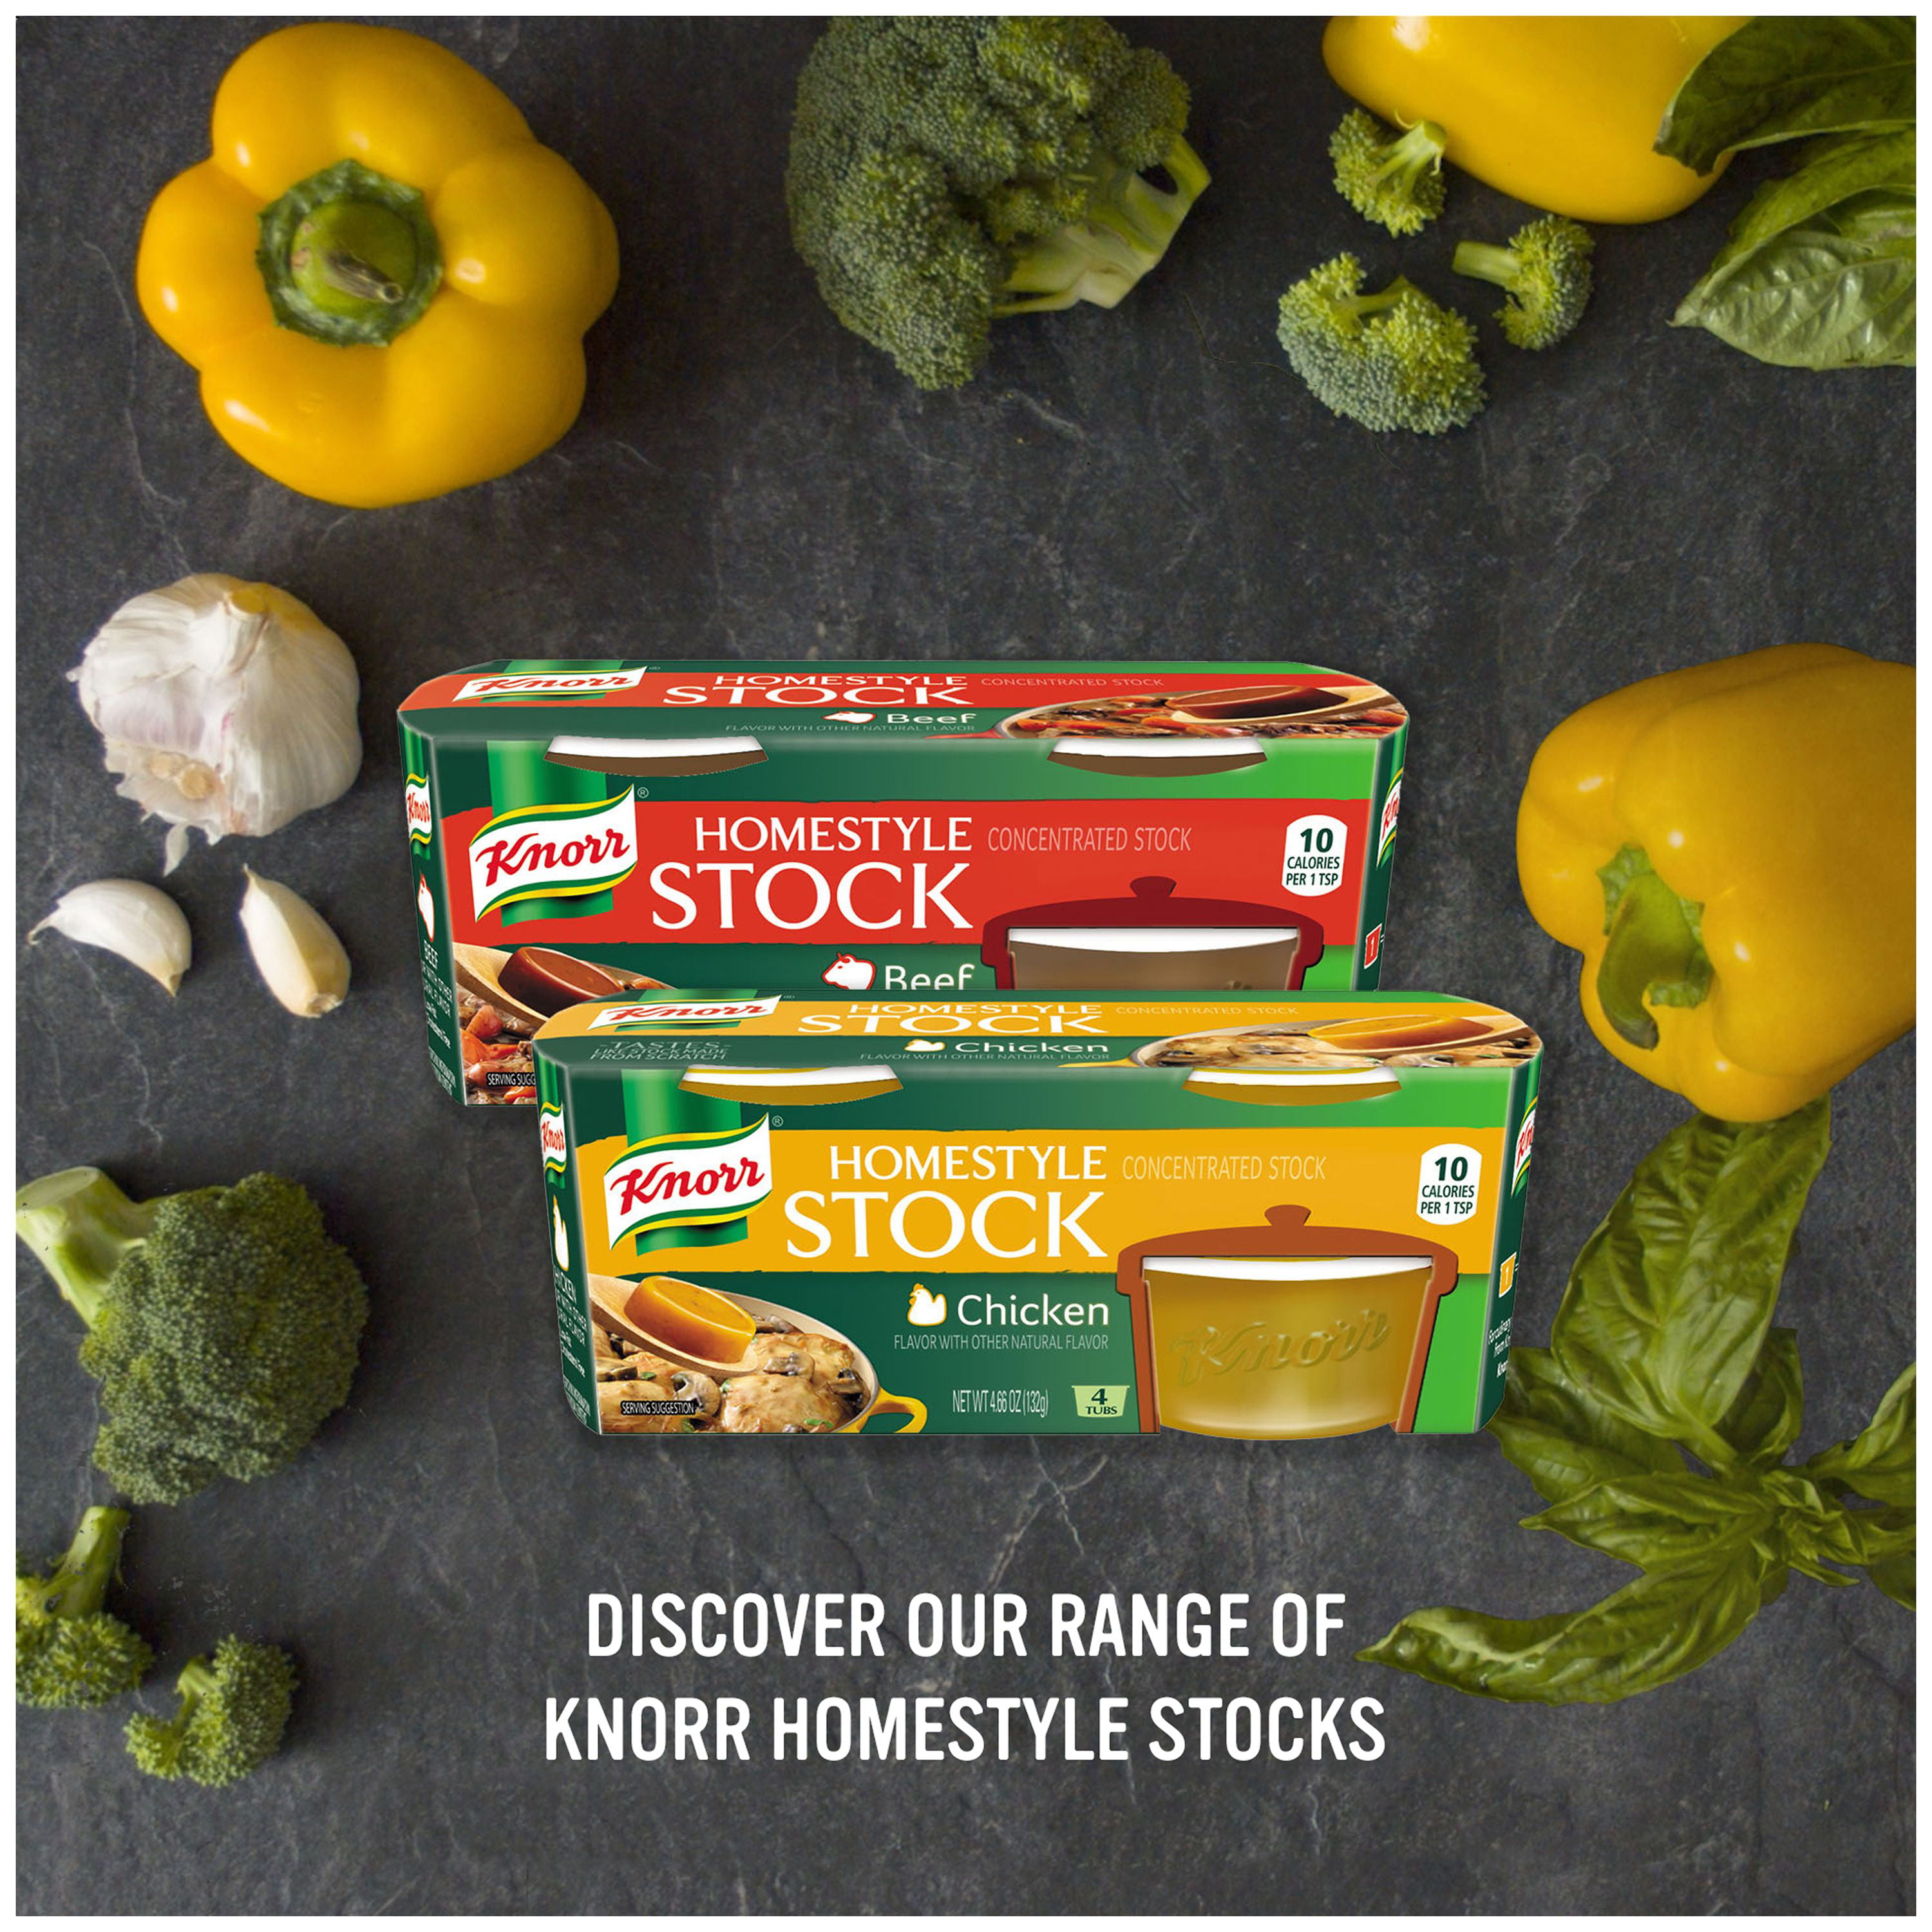 knorr beef stock